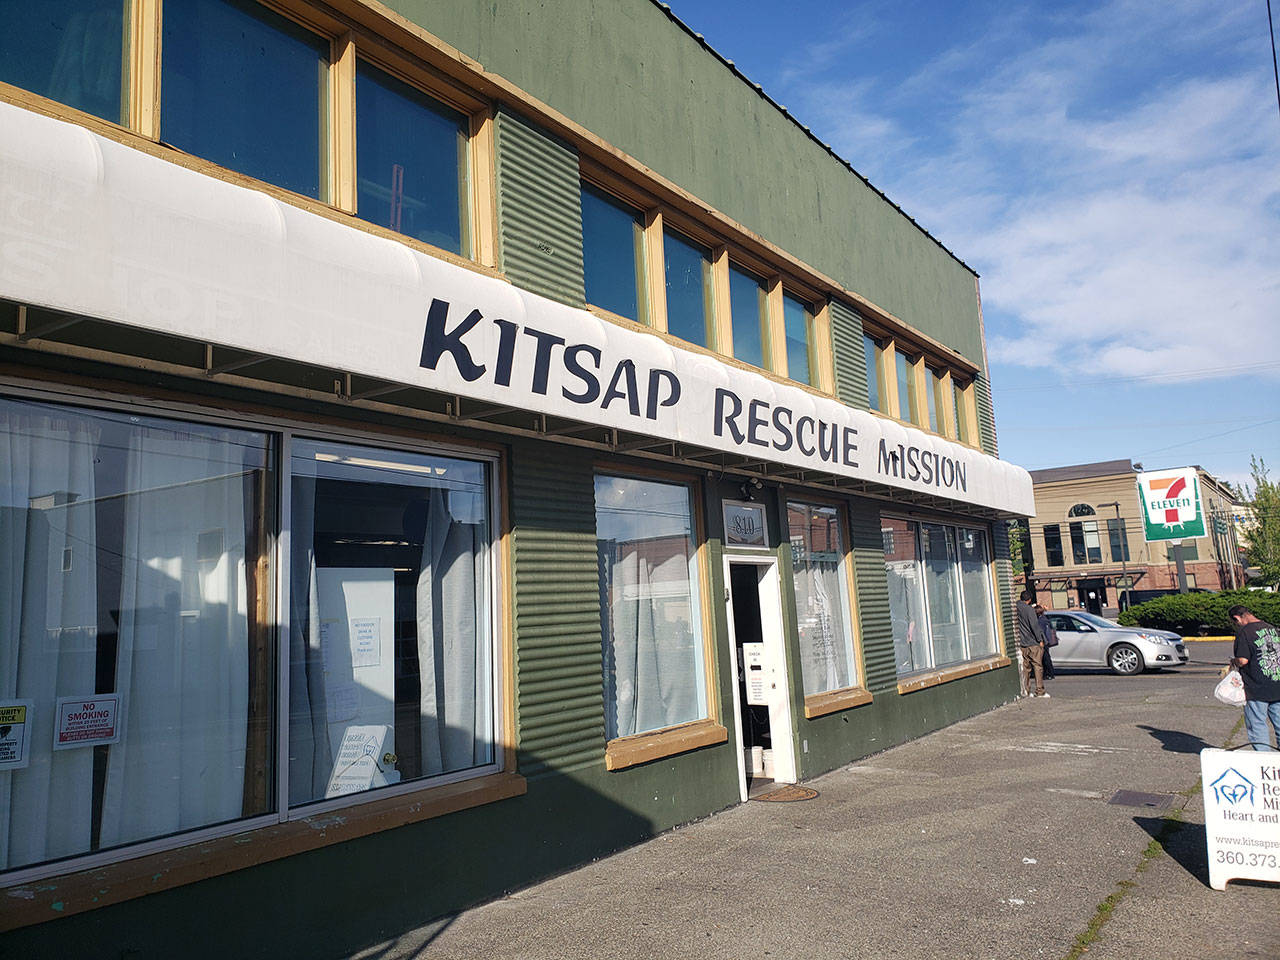 Kitsap Rescue Mission launches crowdfunding campaign